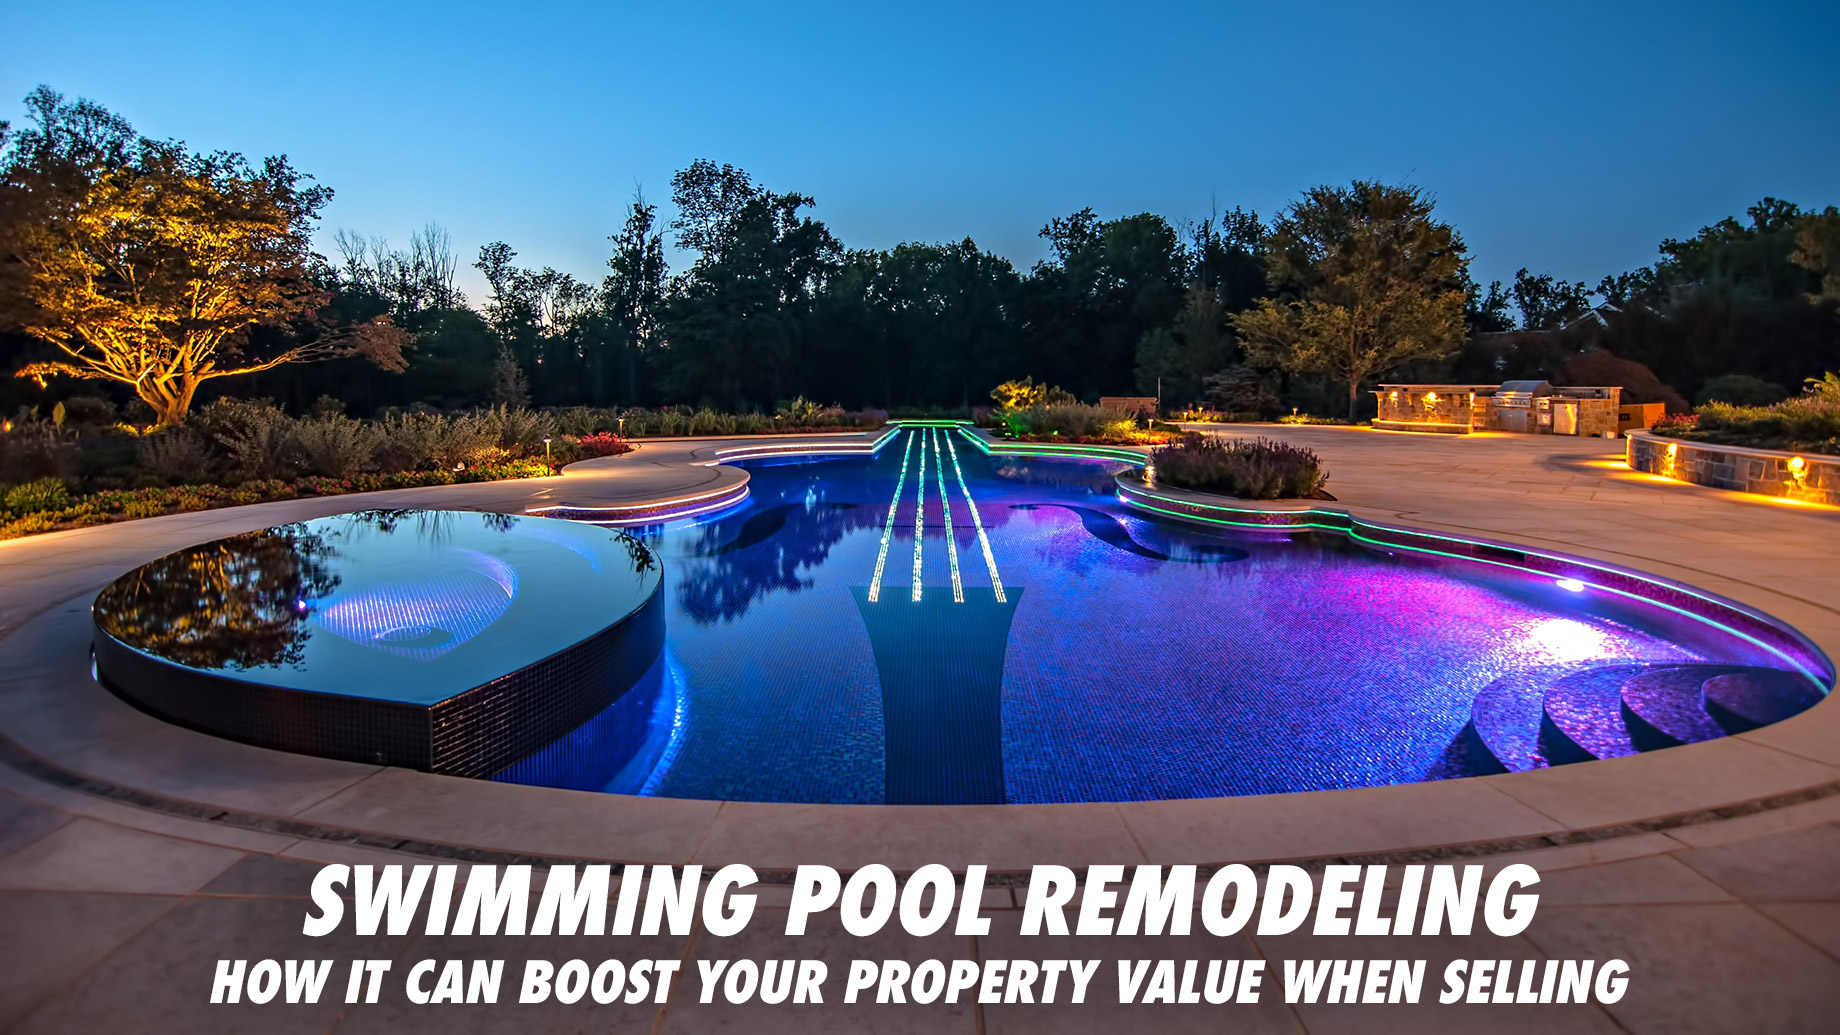 Swimming Pool Remodeling - How It Can Boost Your Property Value When Selling